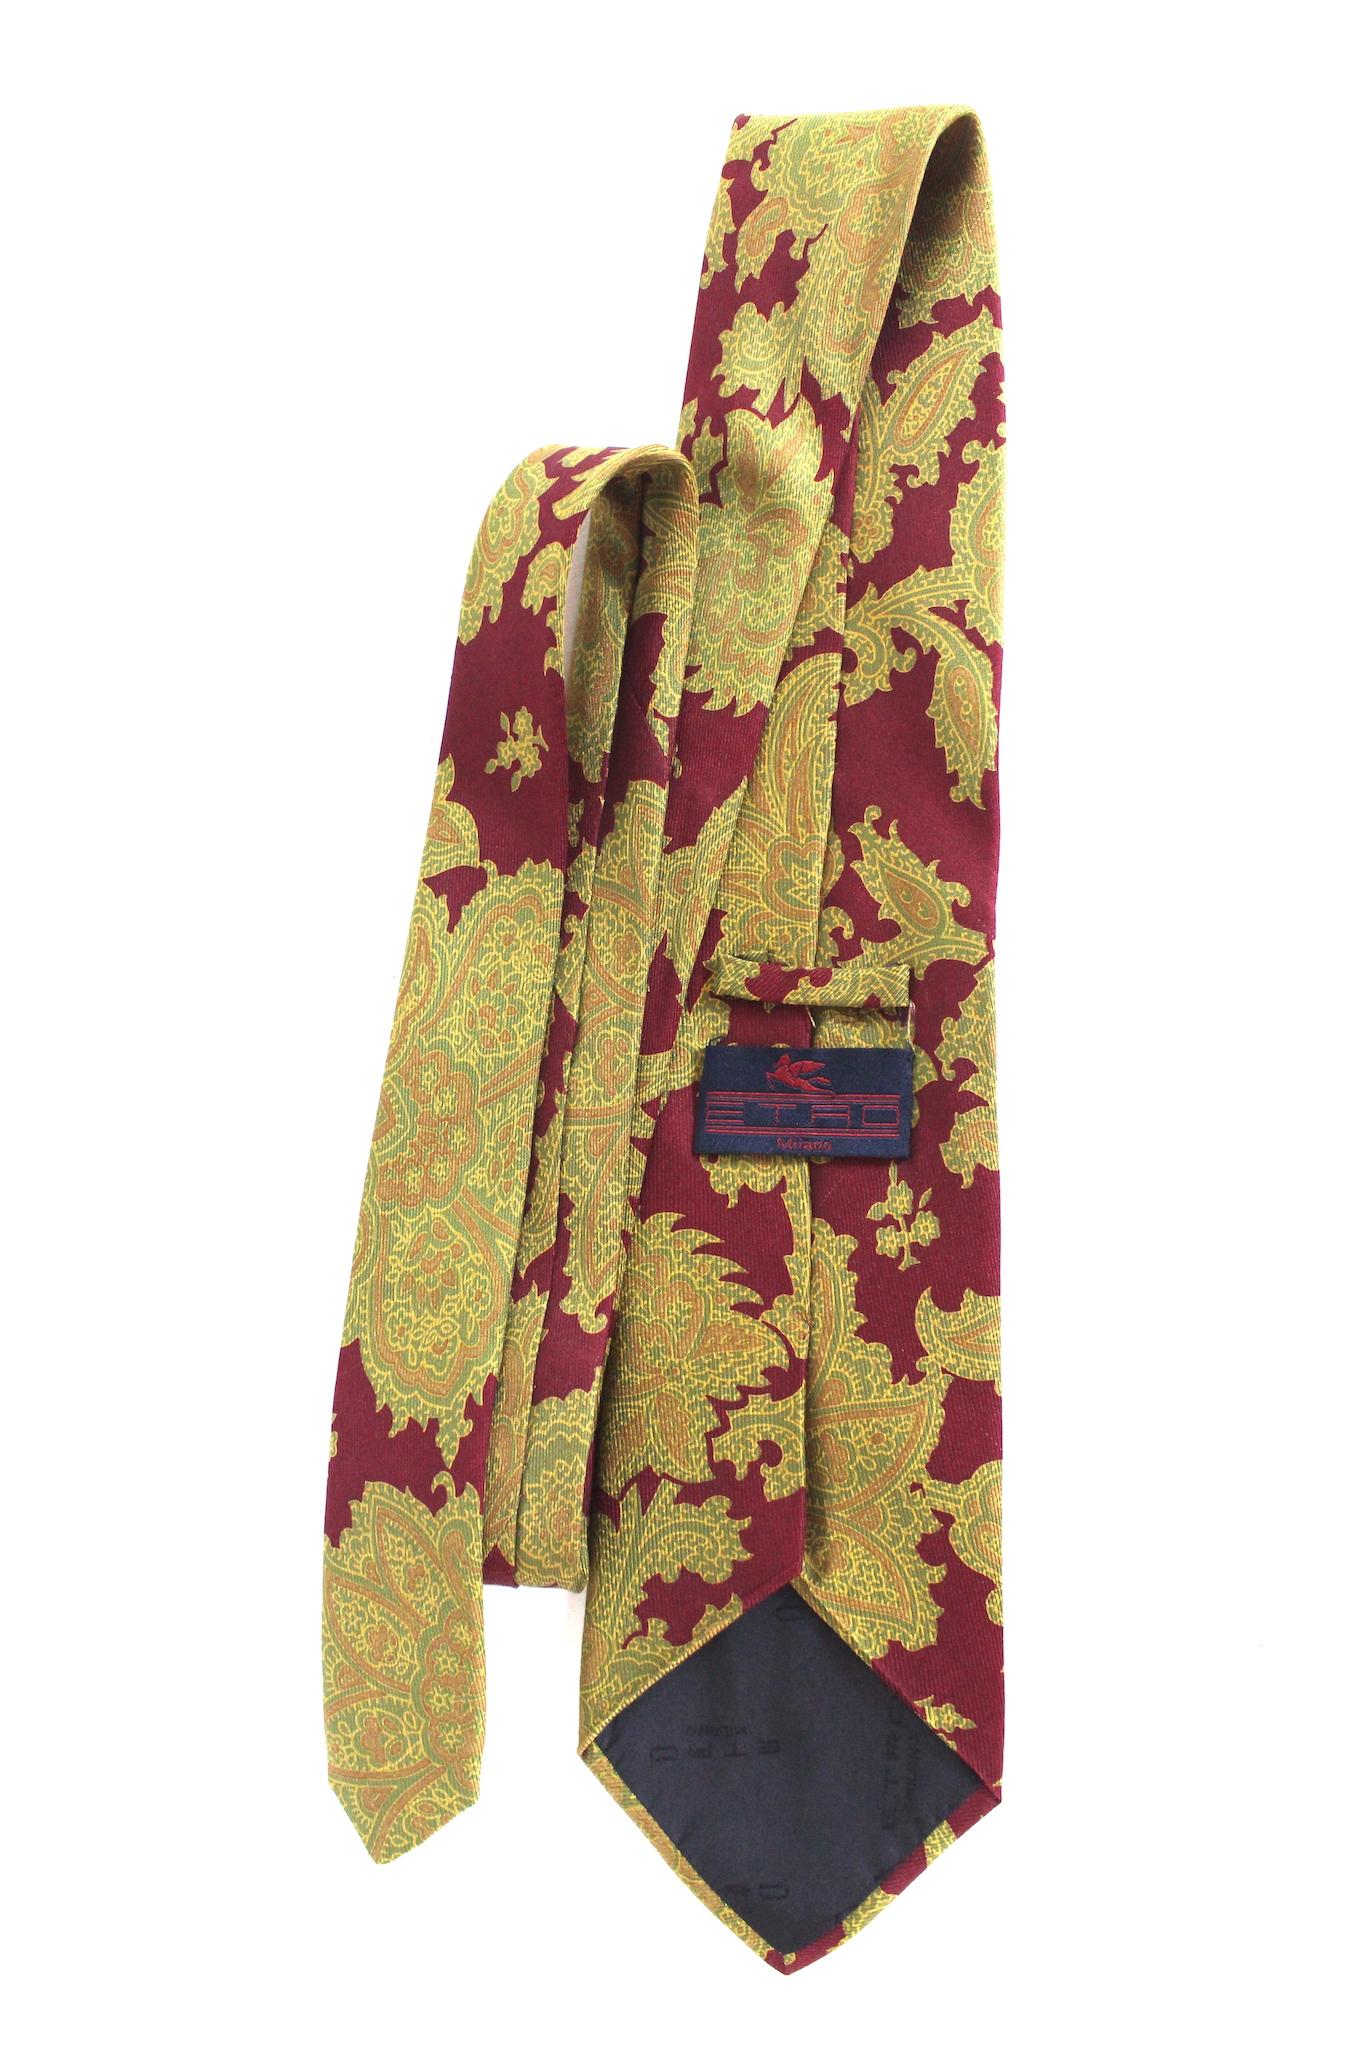 Etro vintage 90s tie. Red color with beige floral designs, 100% silk. Made in italy.

Length: 145 cm
Width: 9.5 cm
